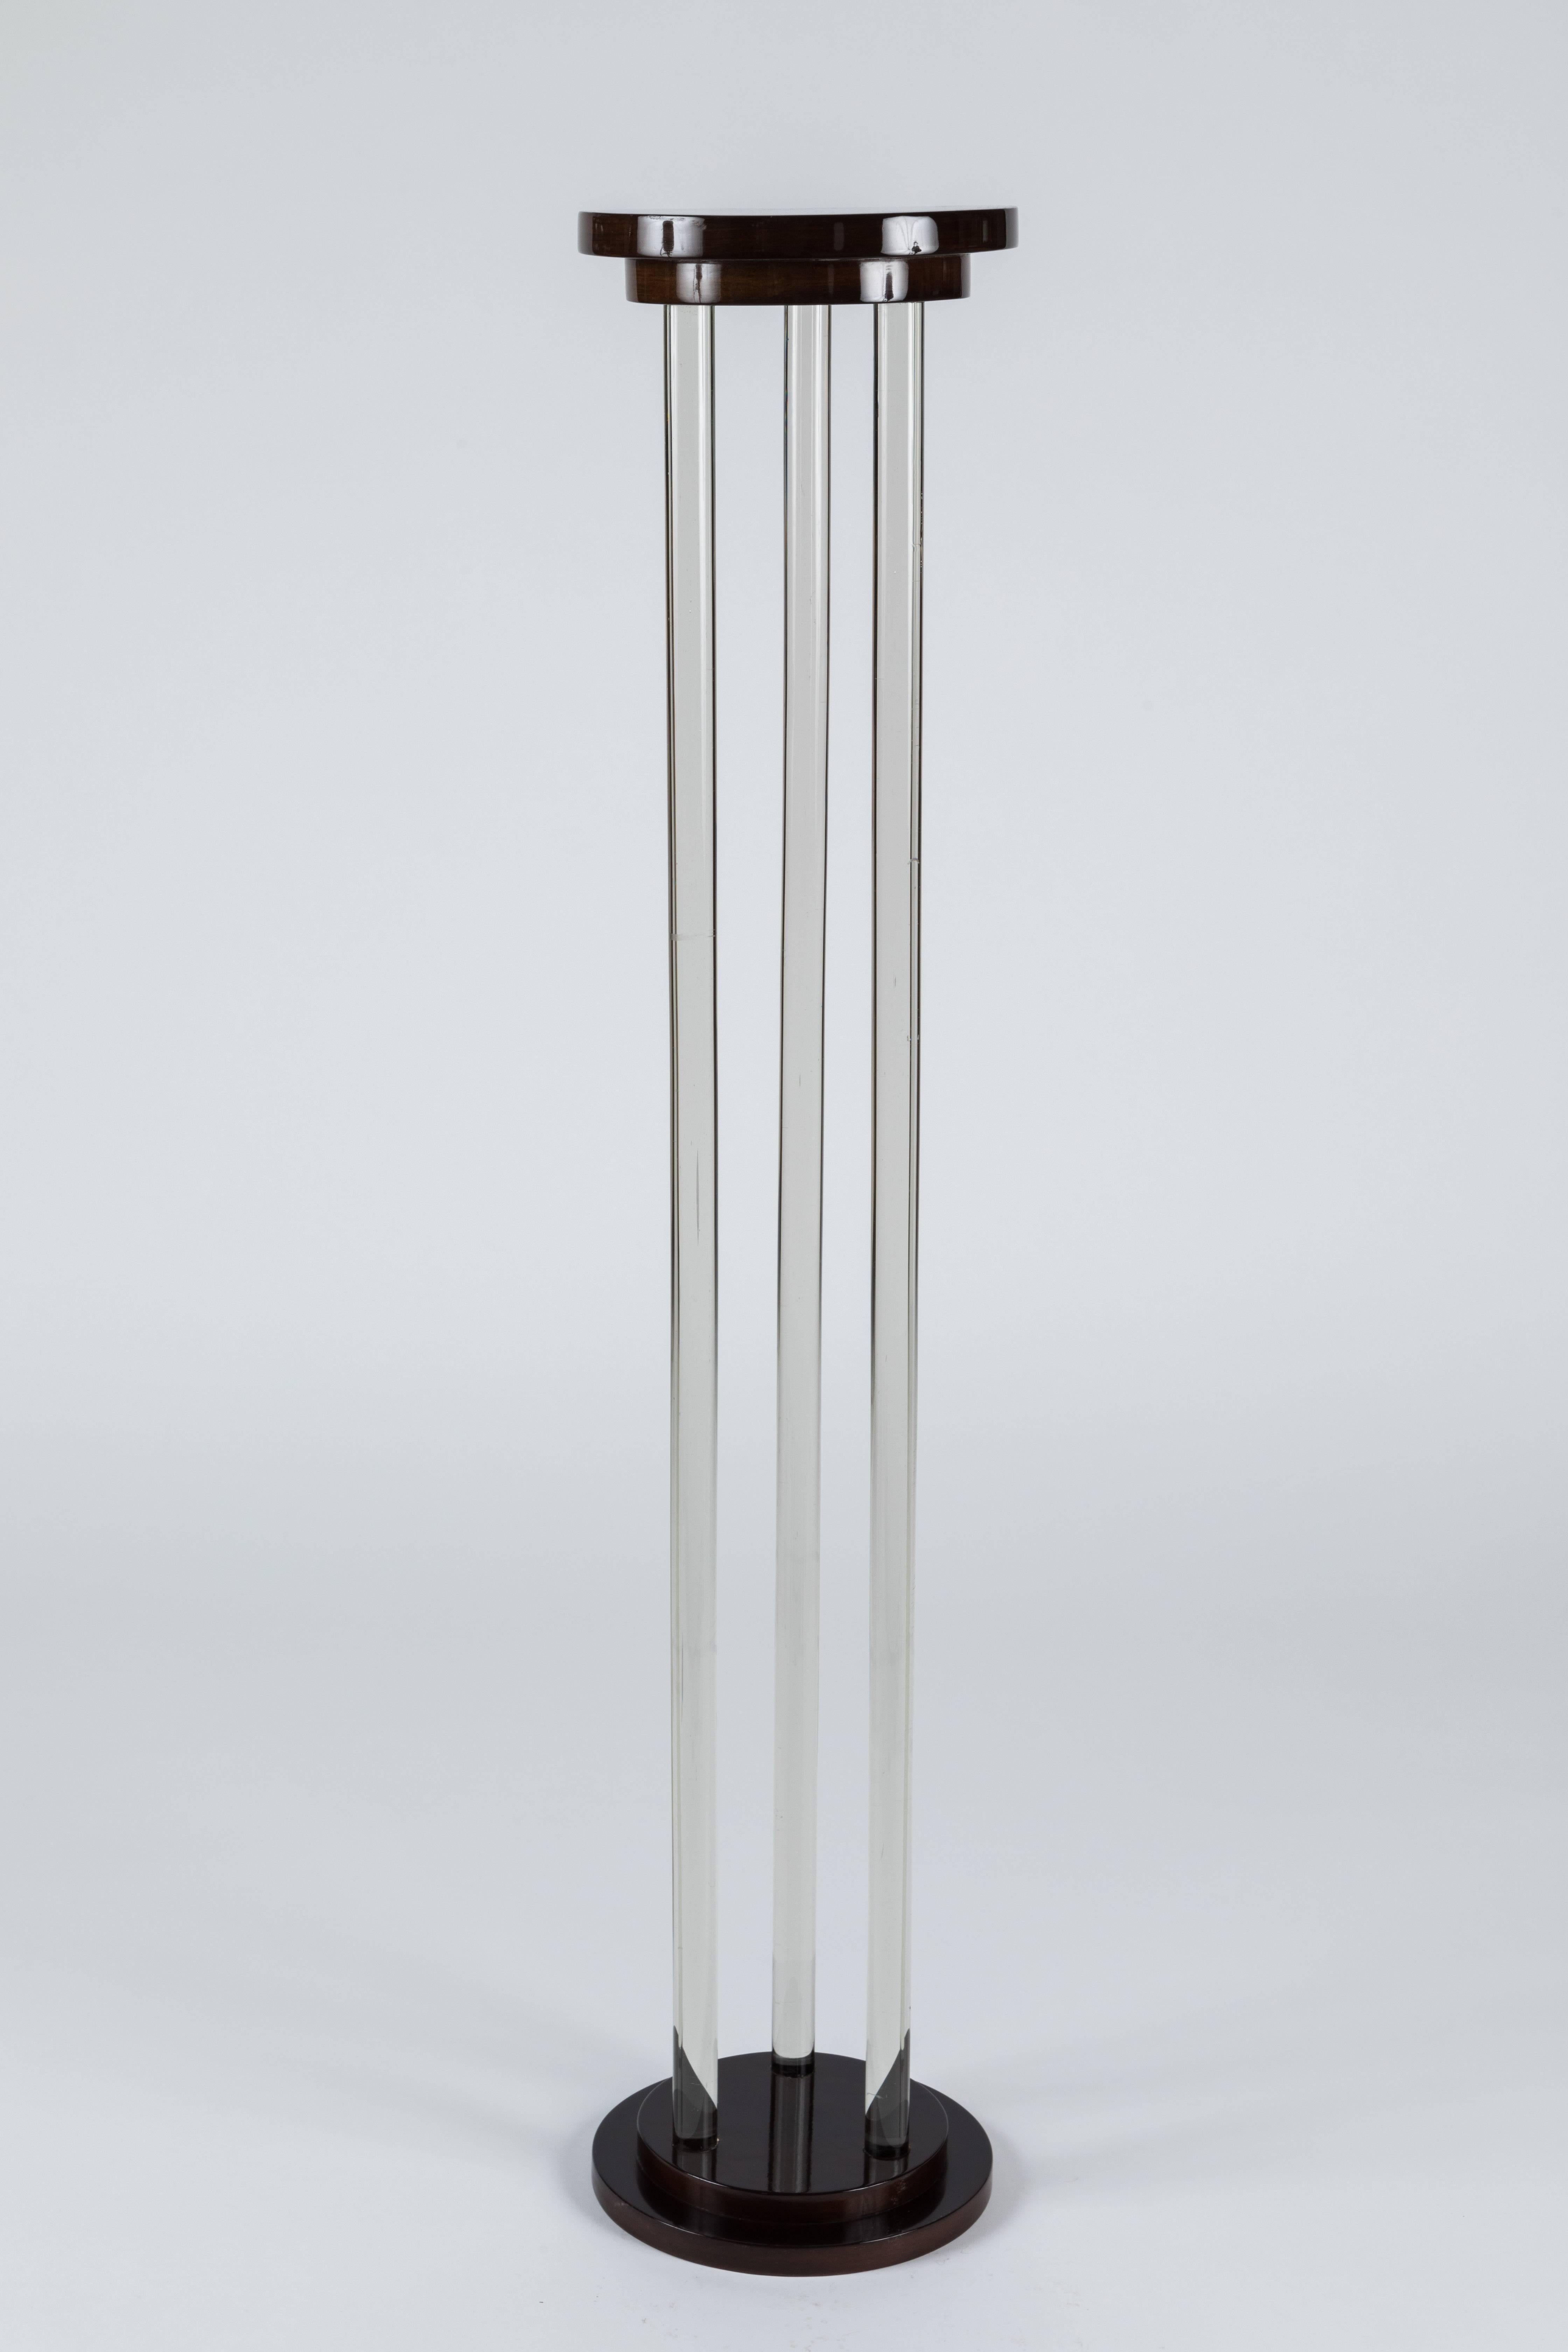 A lovely Art Deco pedestal featuring high polished wood elements separated by heavy duty glass rods.